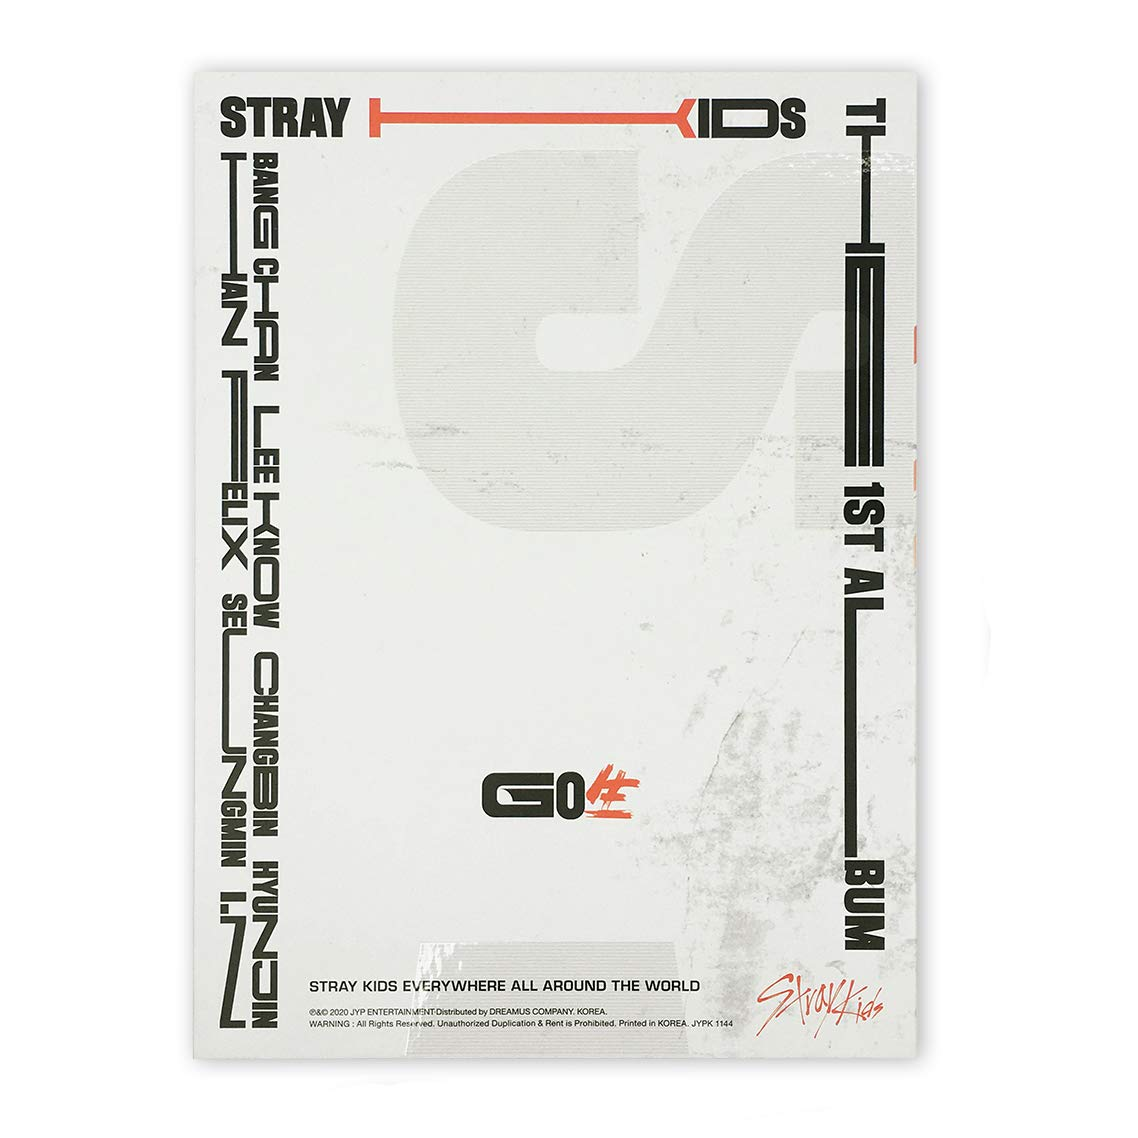 Buy official Stray Kids Albums